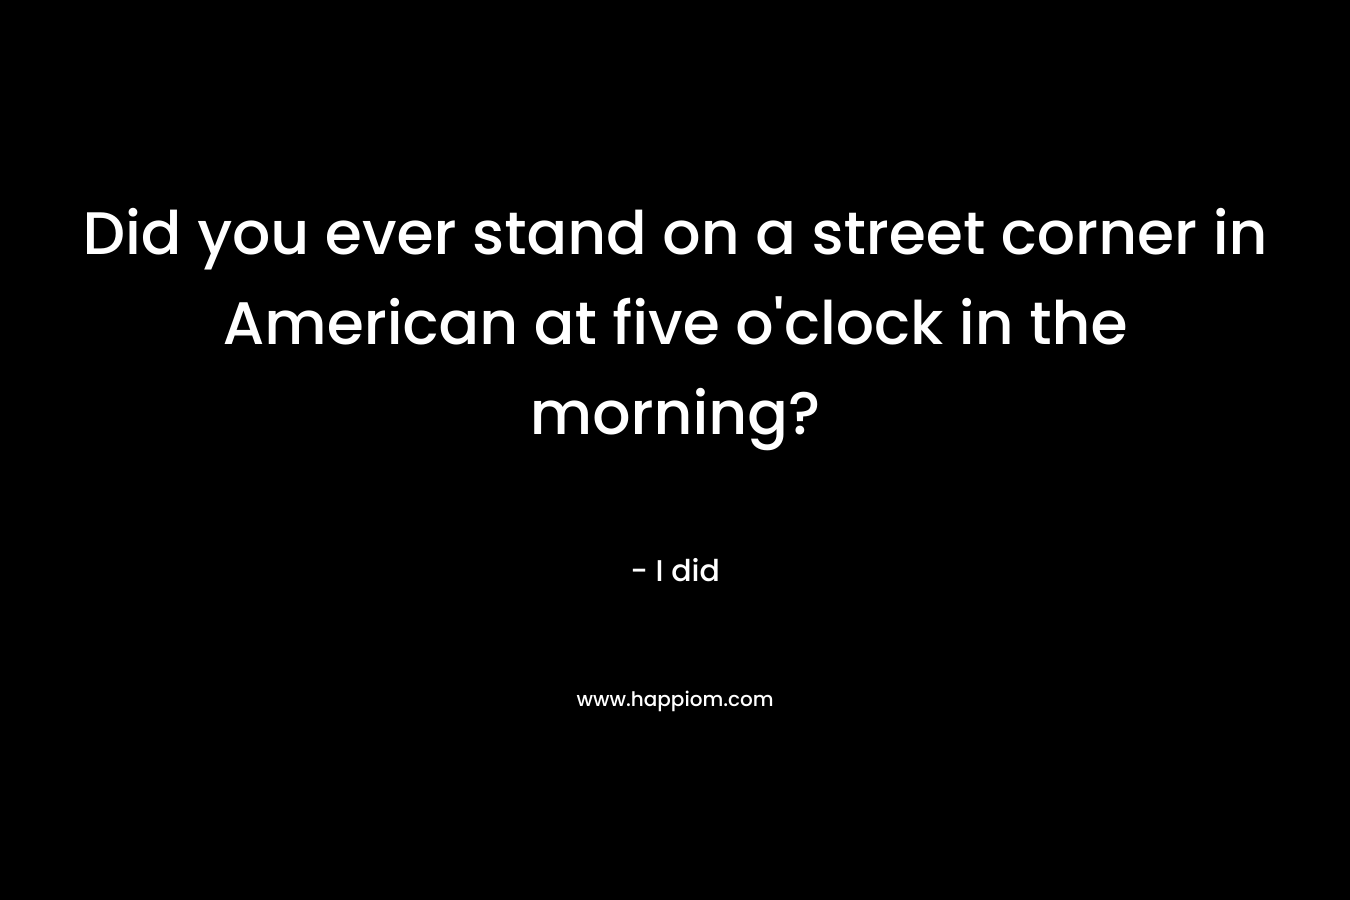 Did you ever stand on a street corner in American at five o'clock in the morning?